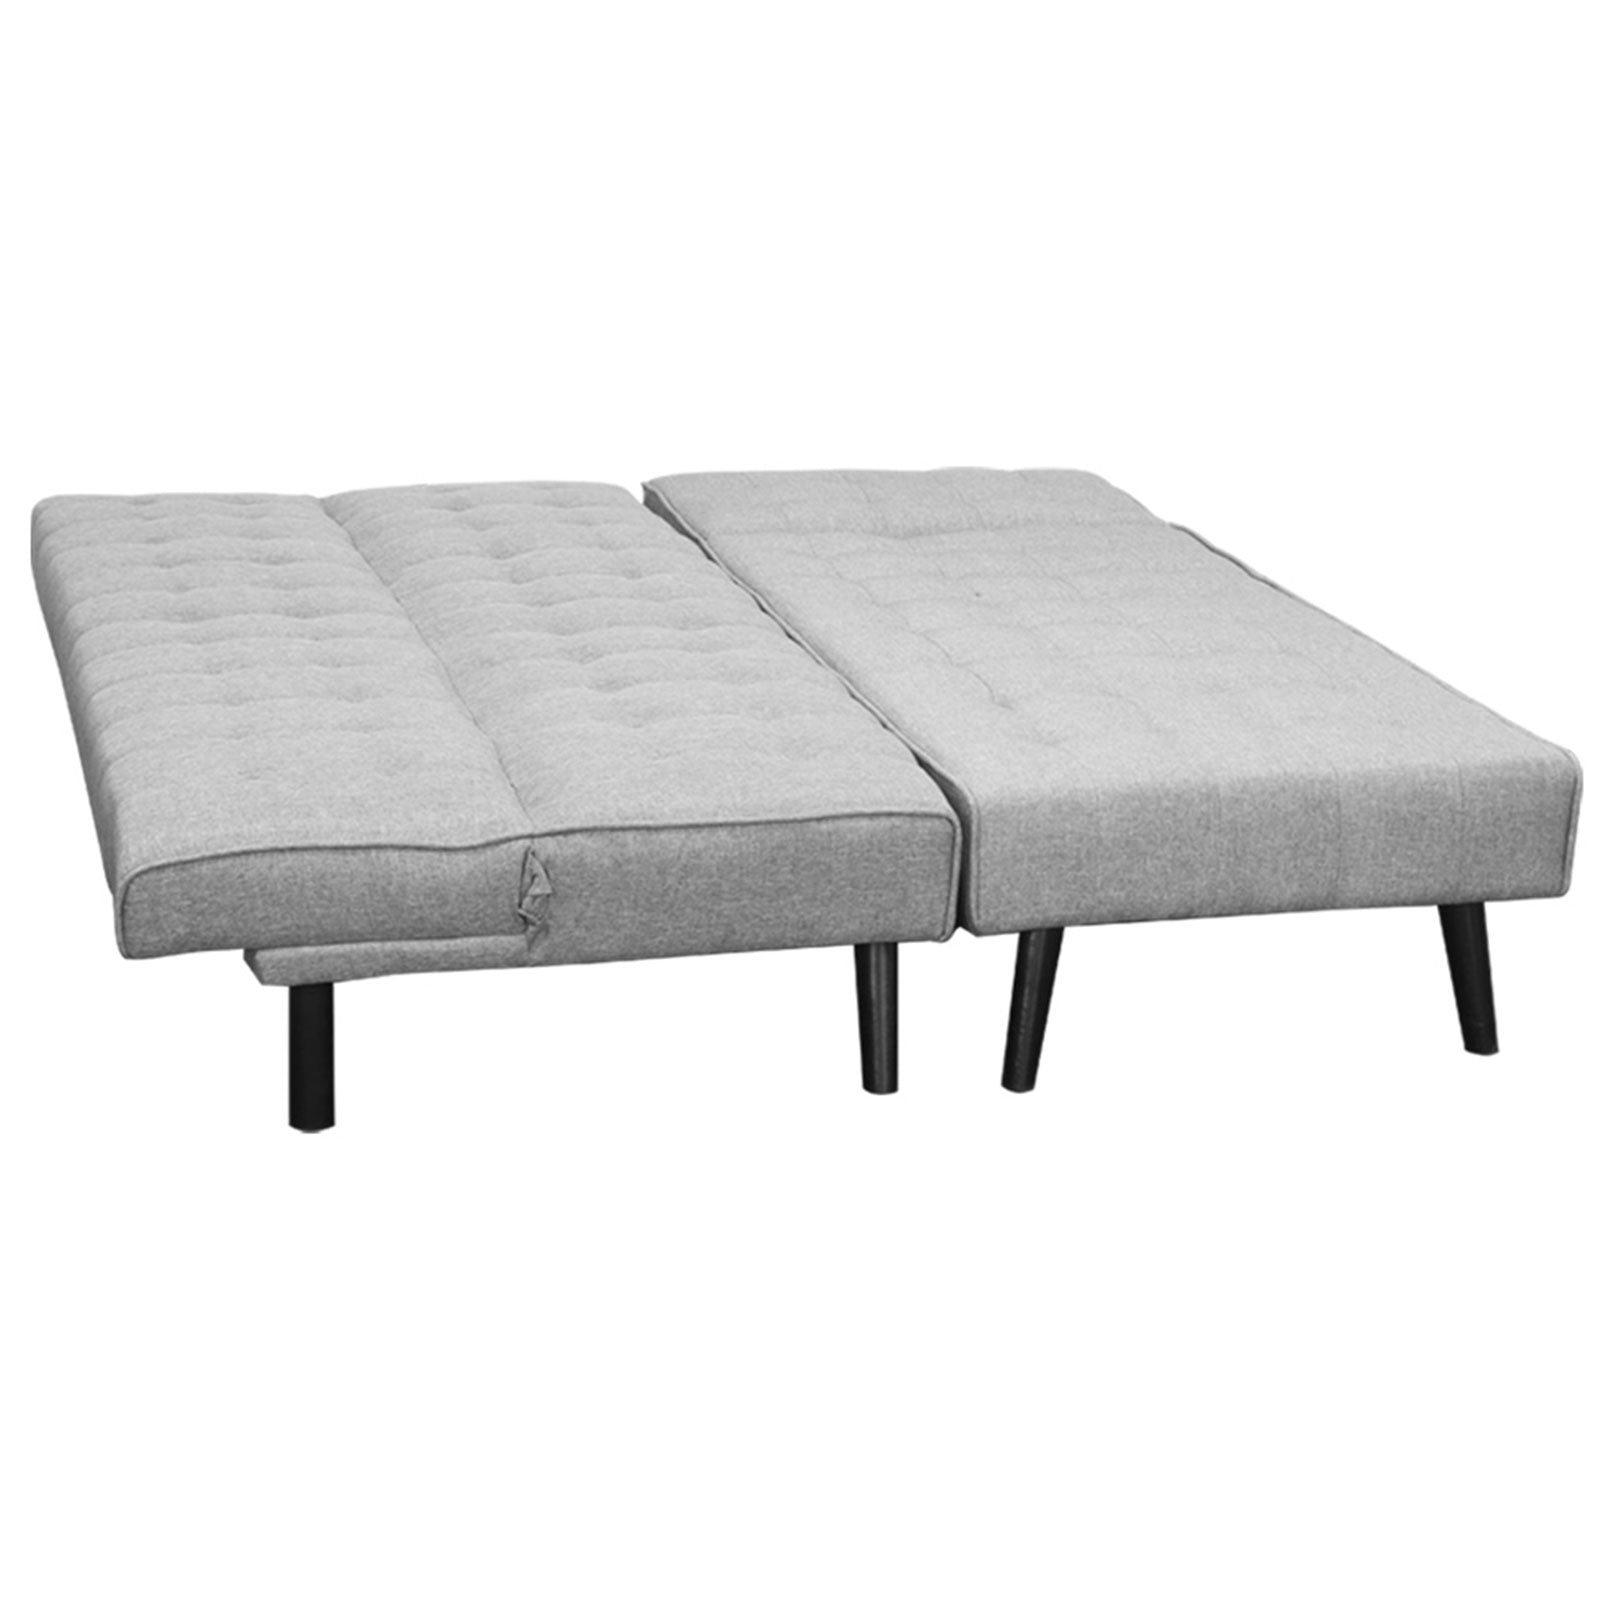 3-seater Corner Sofa Bed With Lounge Chaise Couch Furniture Light Grey